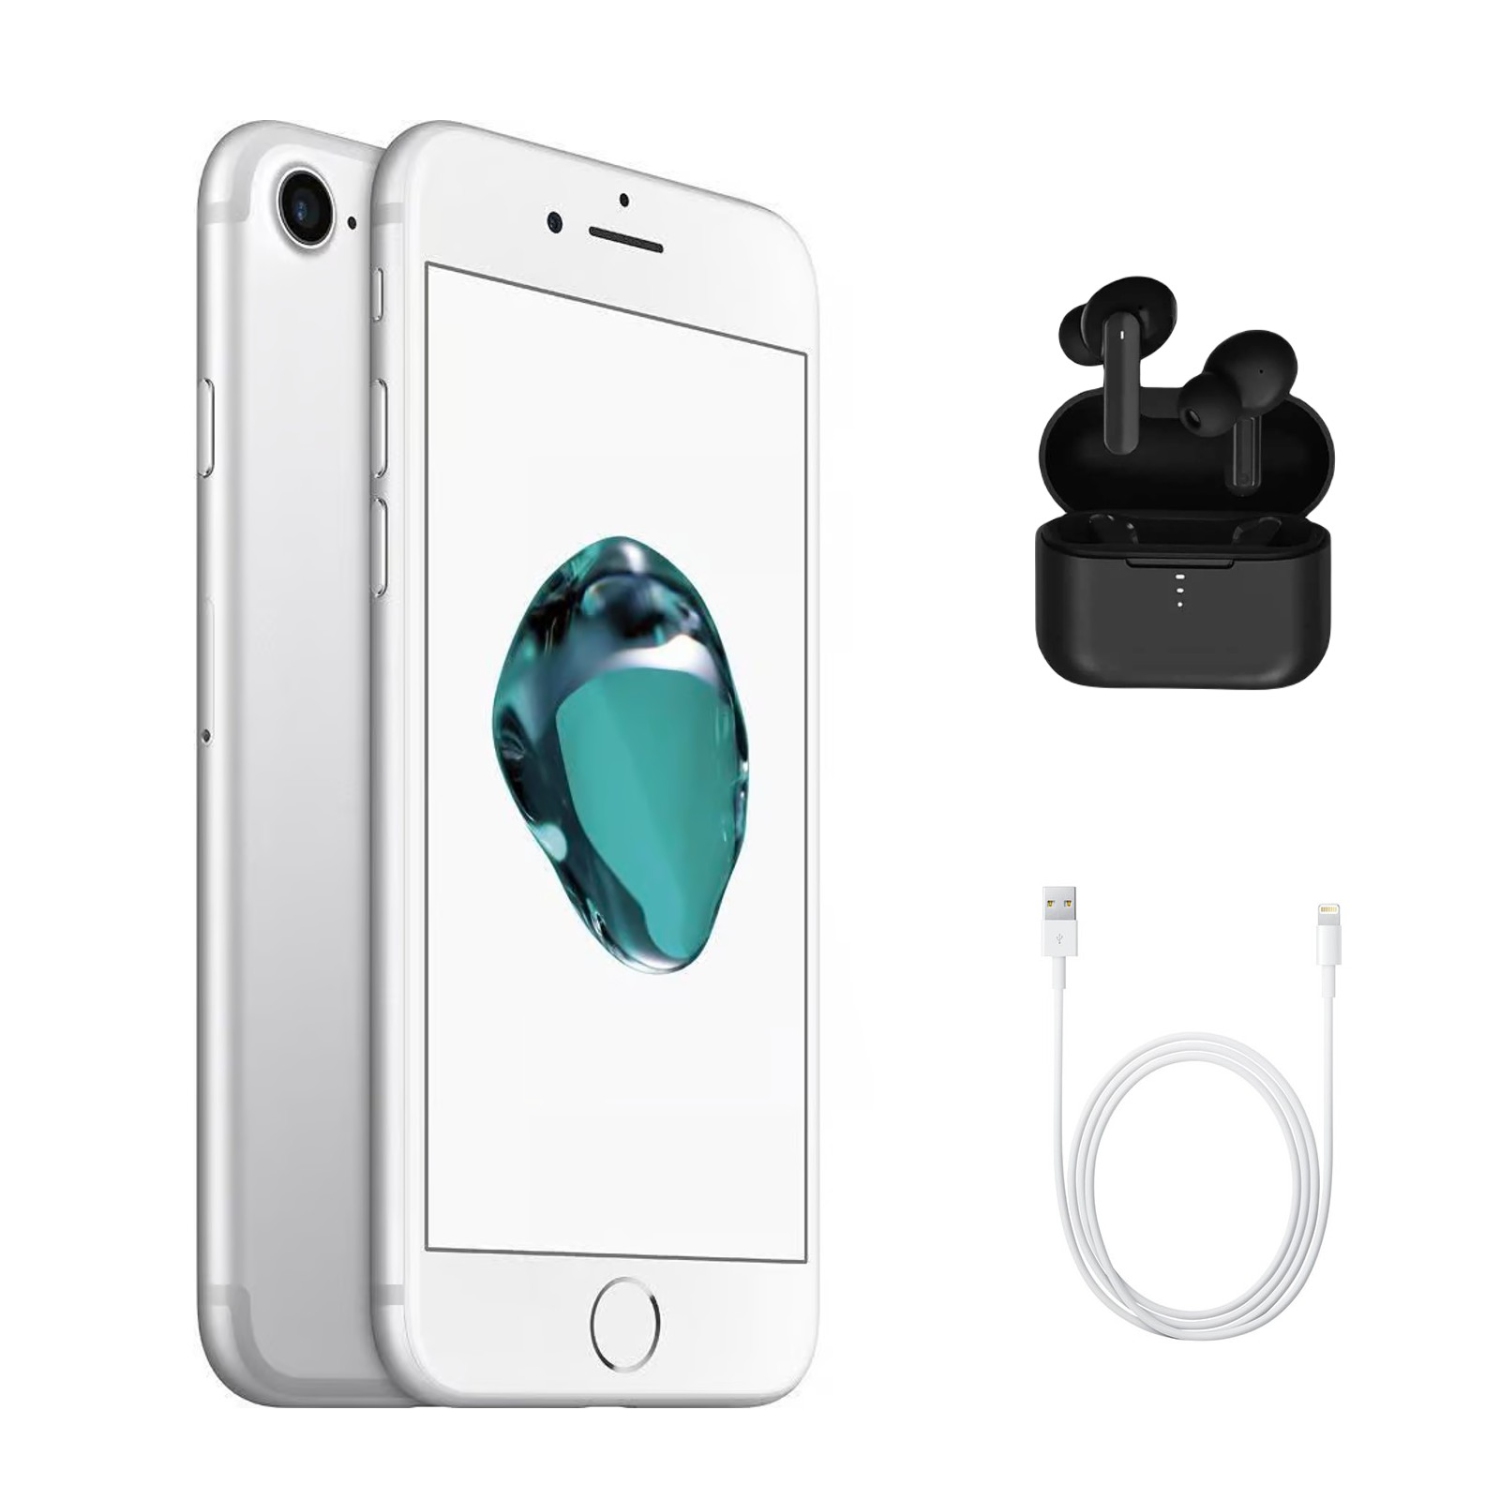 Refurbished (Excellent) Apple iPhone 7 A1660 (Fully Unlocked) 32GB Silver w/ Wireless Earbuds